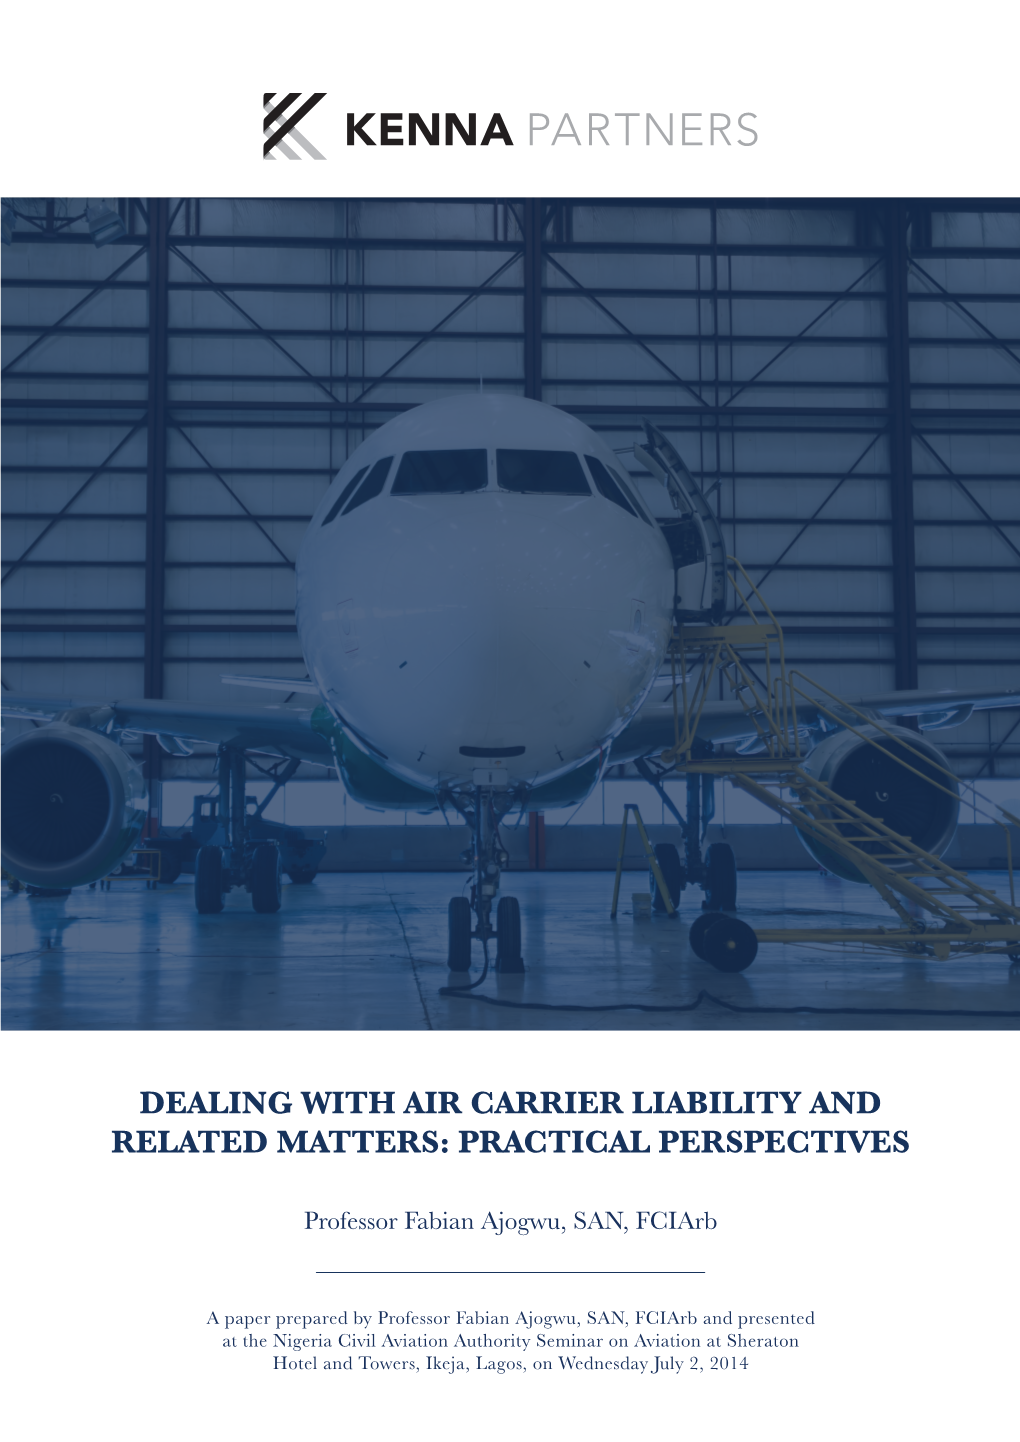 Dealing with Air Carrier Liability and Related Matters: Practical Perspectives